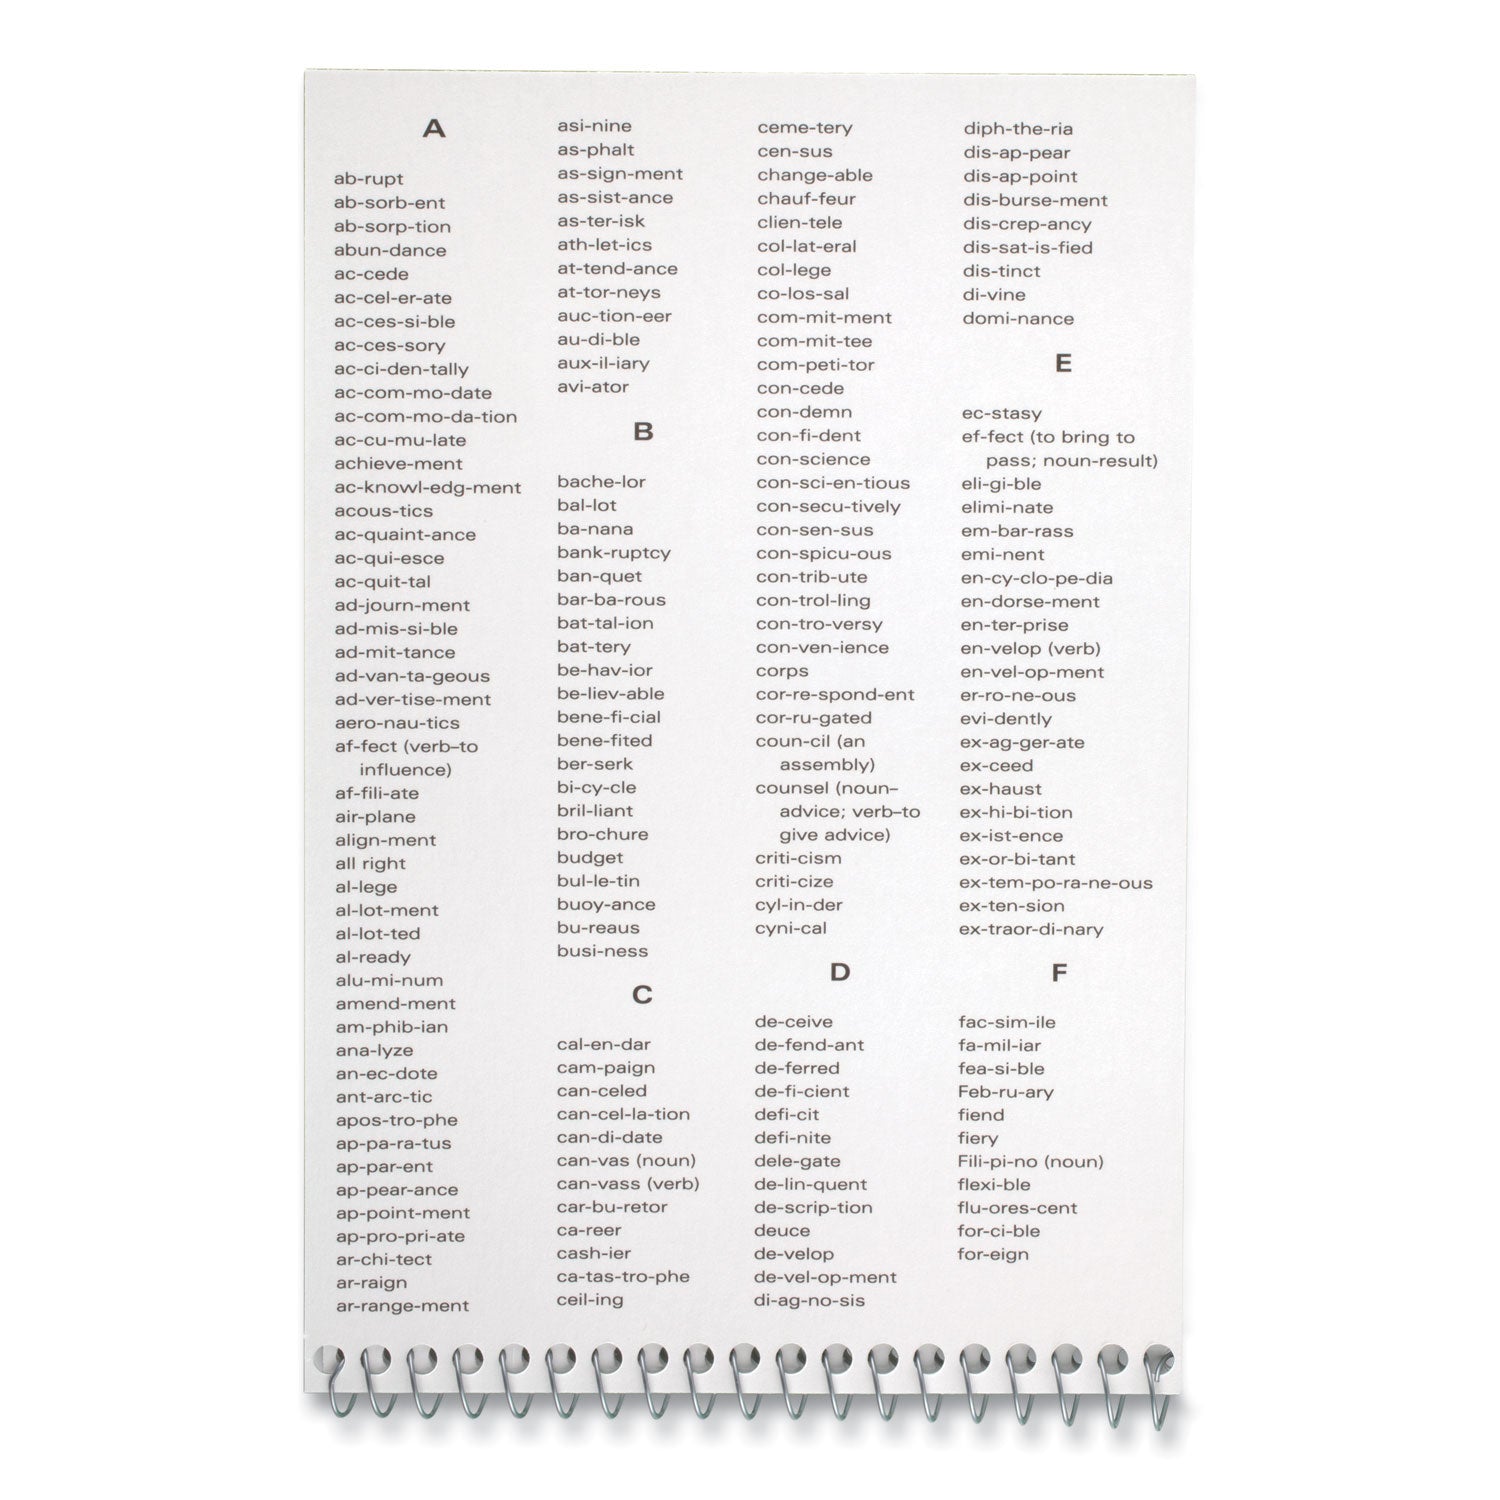 Spell-Write Wirebound Steno Pad, Gregg Rule, Randomly Assorted Cover Colors, 80 White 6 x 9 Sheets - 